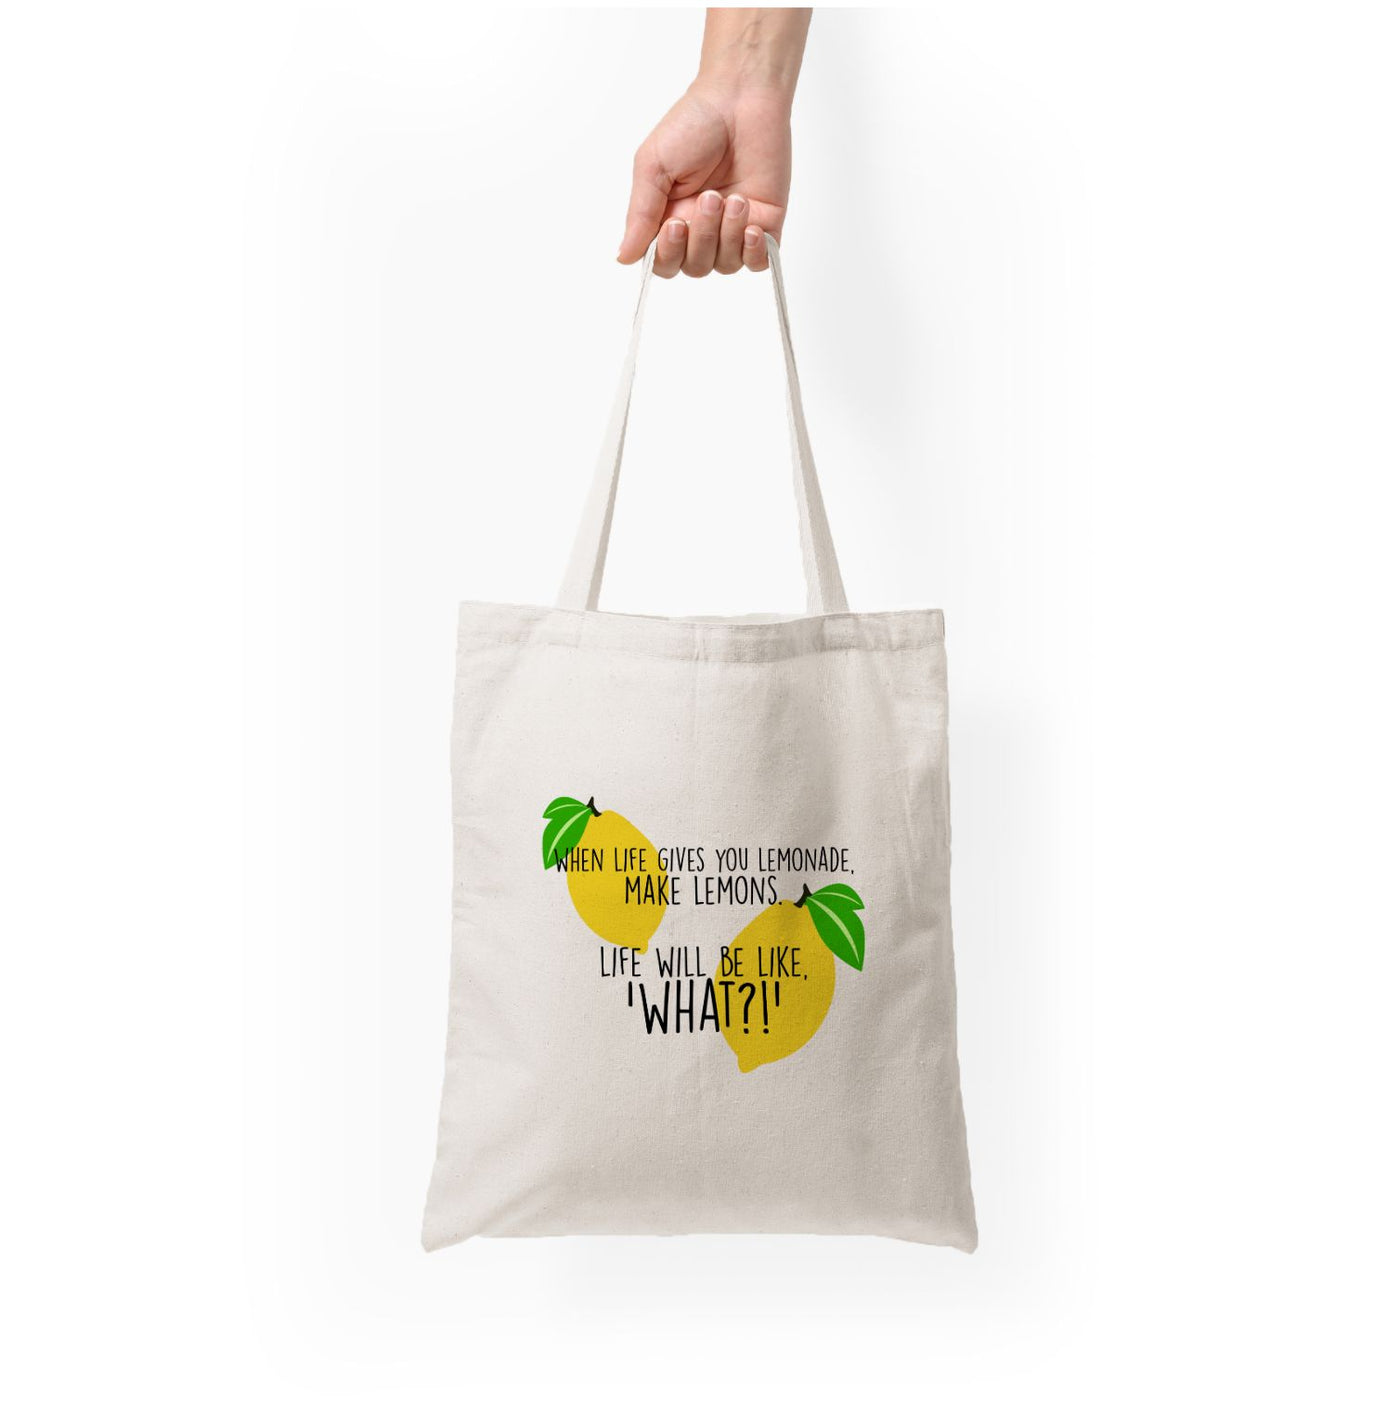 When Life Gives You Lemonade - TV Quotes Tote Bag